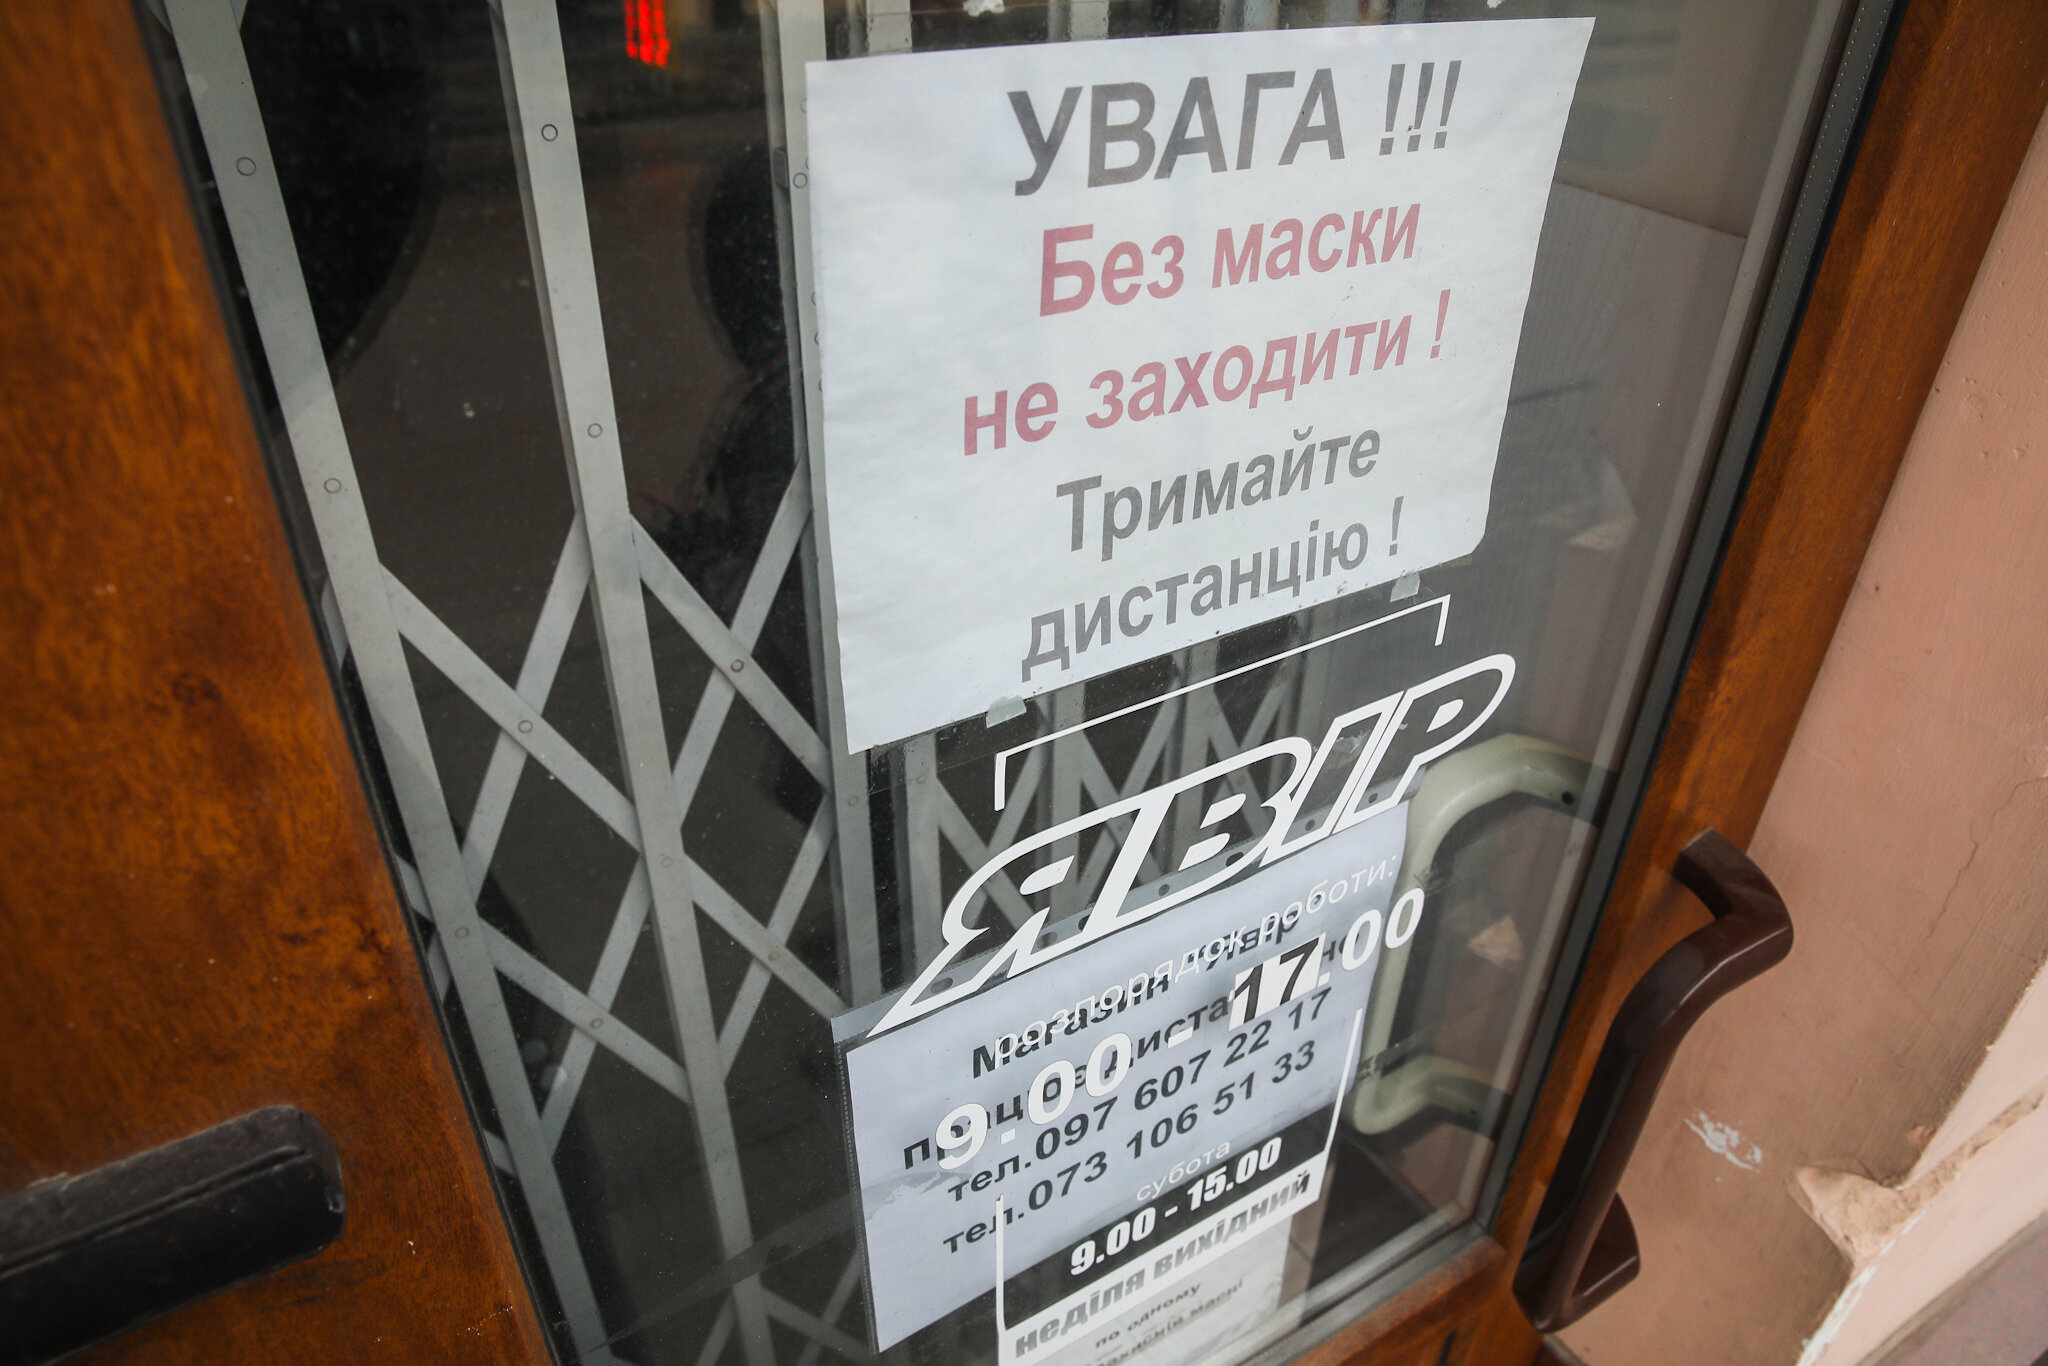 The shops are closed in Kolomyia in Ivano-Frankivsk Oblast as of March 16, 2021. A lockdown is in force since late February. 